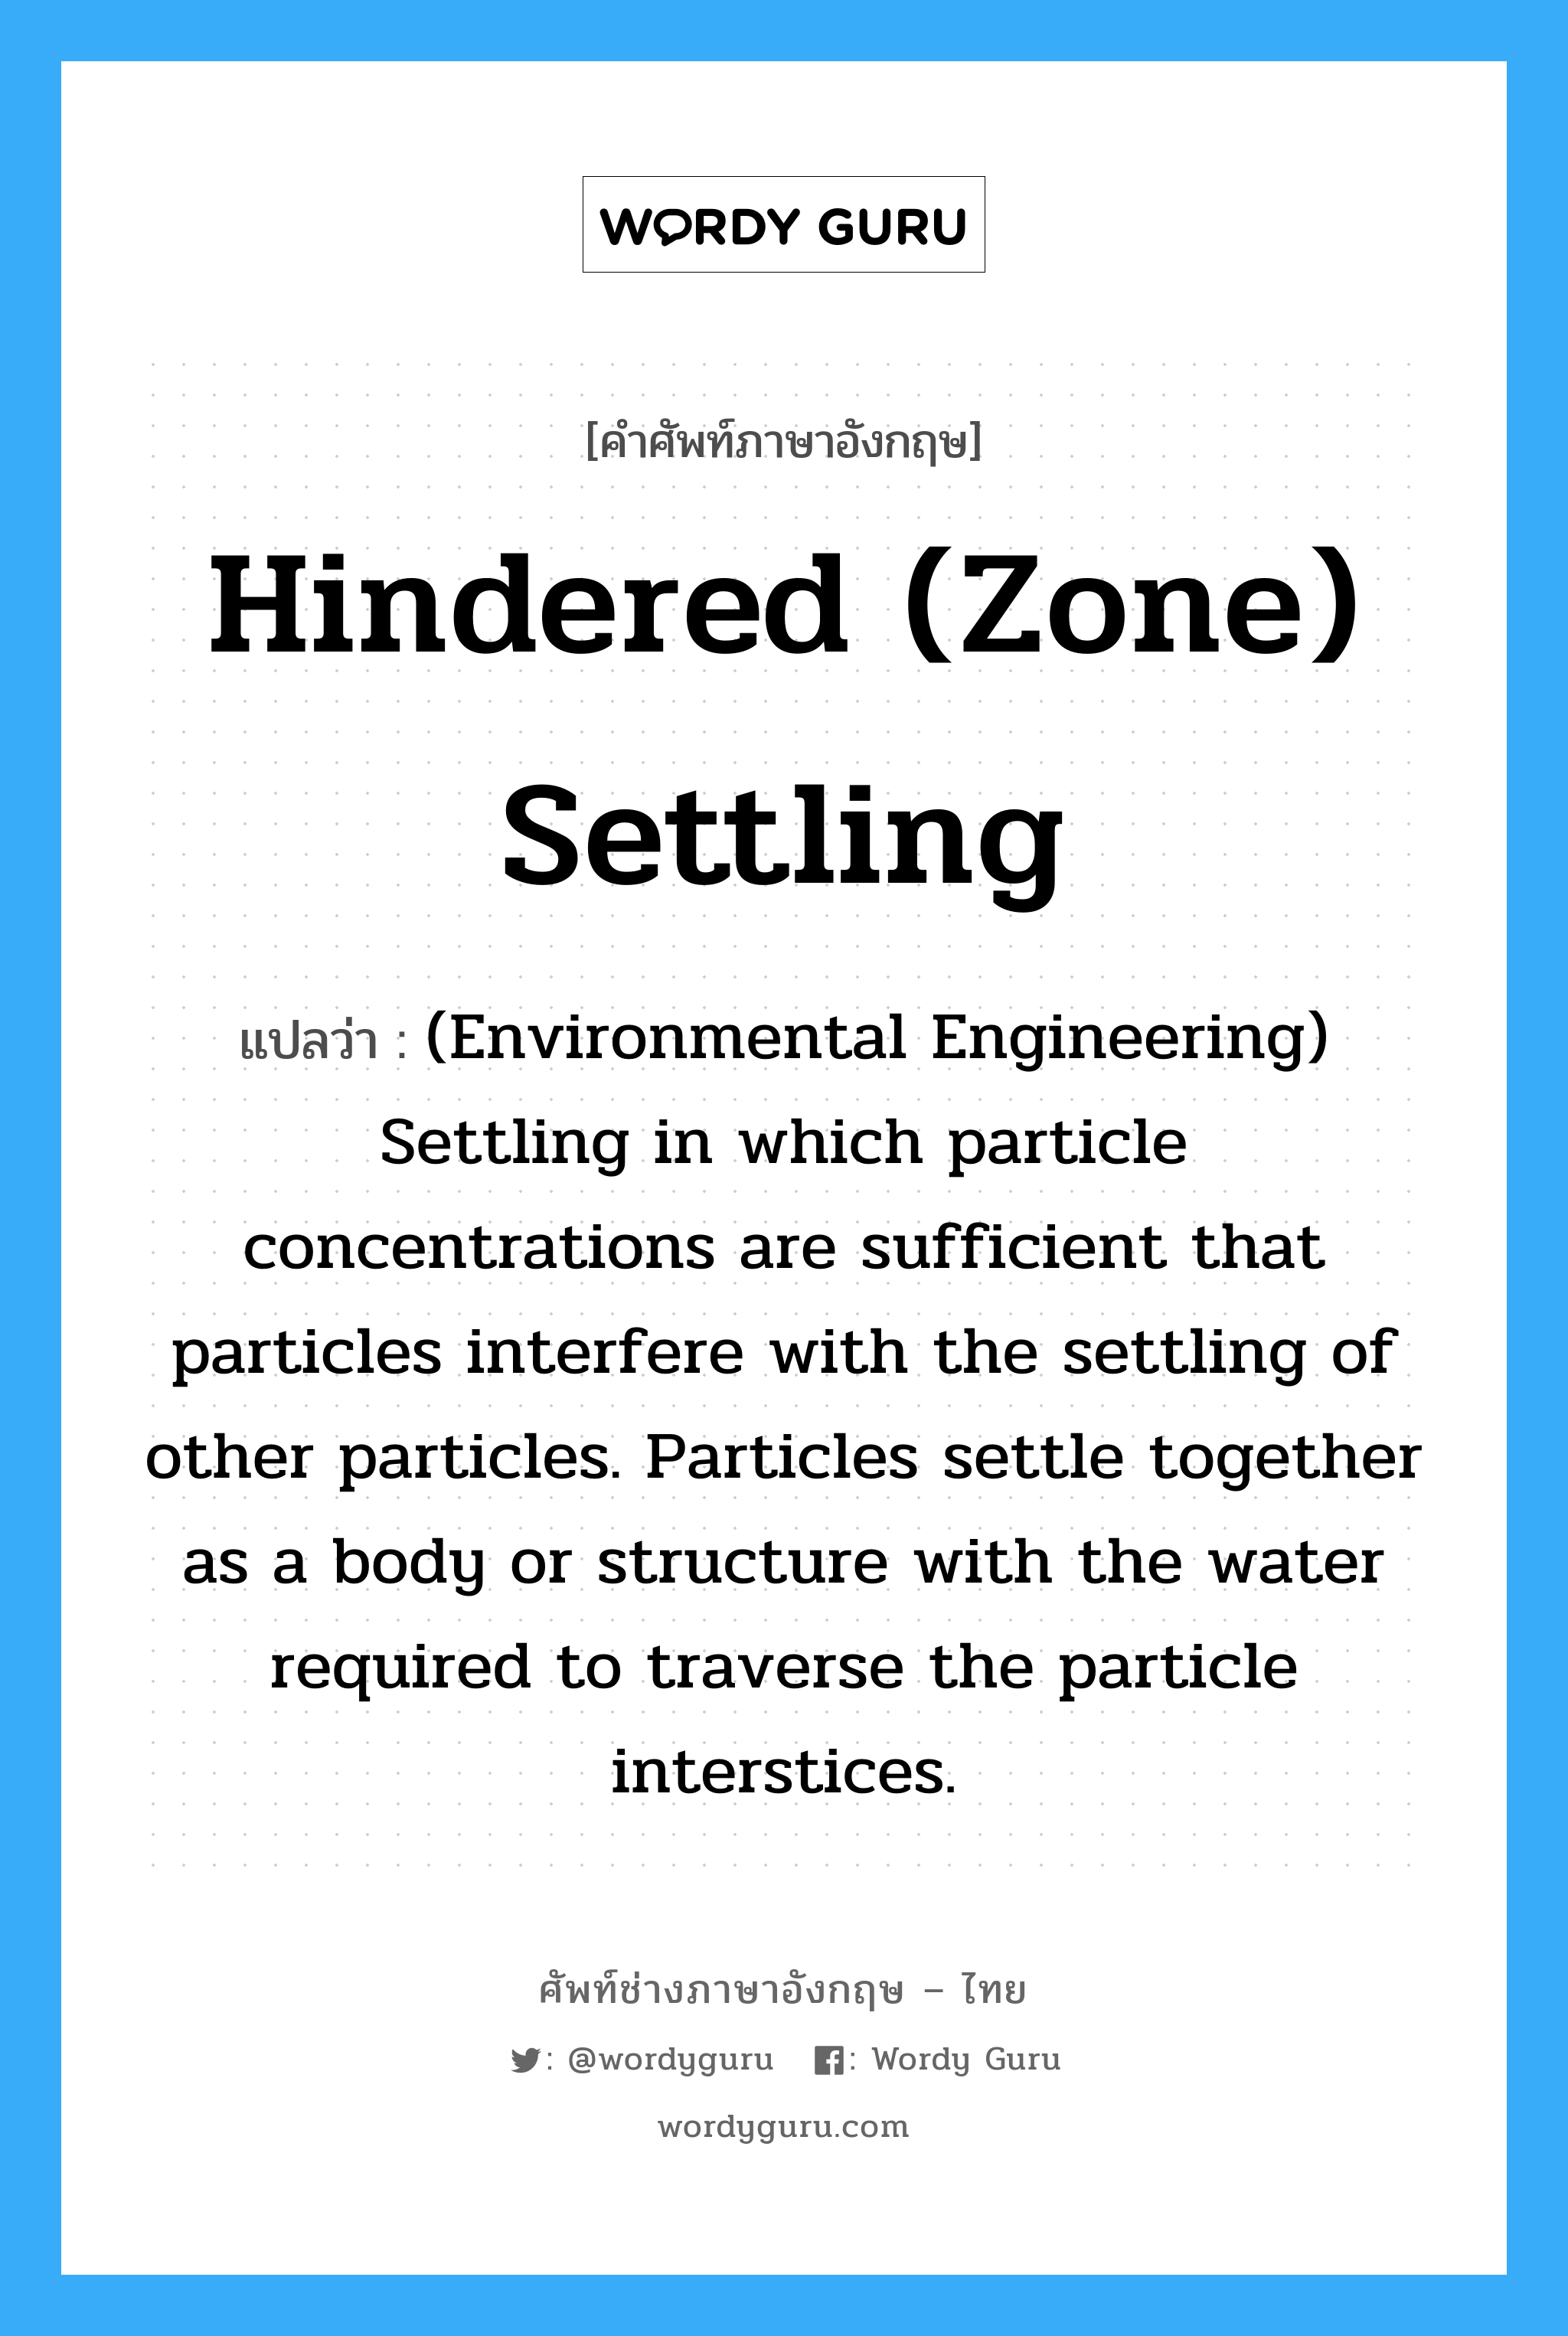 Hindered (Zone) settling แปลว่า?, คำศัพท์ช่างภาษาอังกฤษ - ไทย Hindered (Zone) settling คำศัพท์ภาษาอังกฤษ Hindered (Zone) settling แปลว่า (Environmental Engineering) Settling in which particle concentrations are sufficient that particles interfere with the settling of other particles. Particles settle together as a body or structure with the water required to traverse the particle interstices.